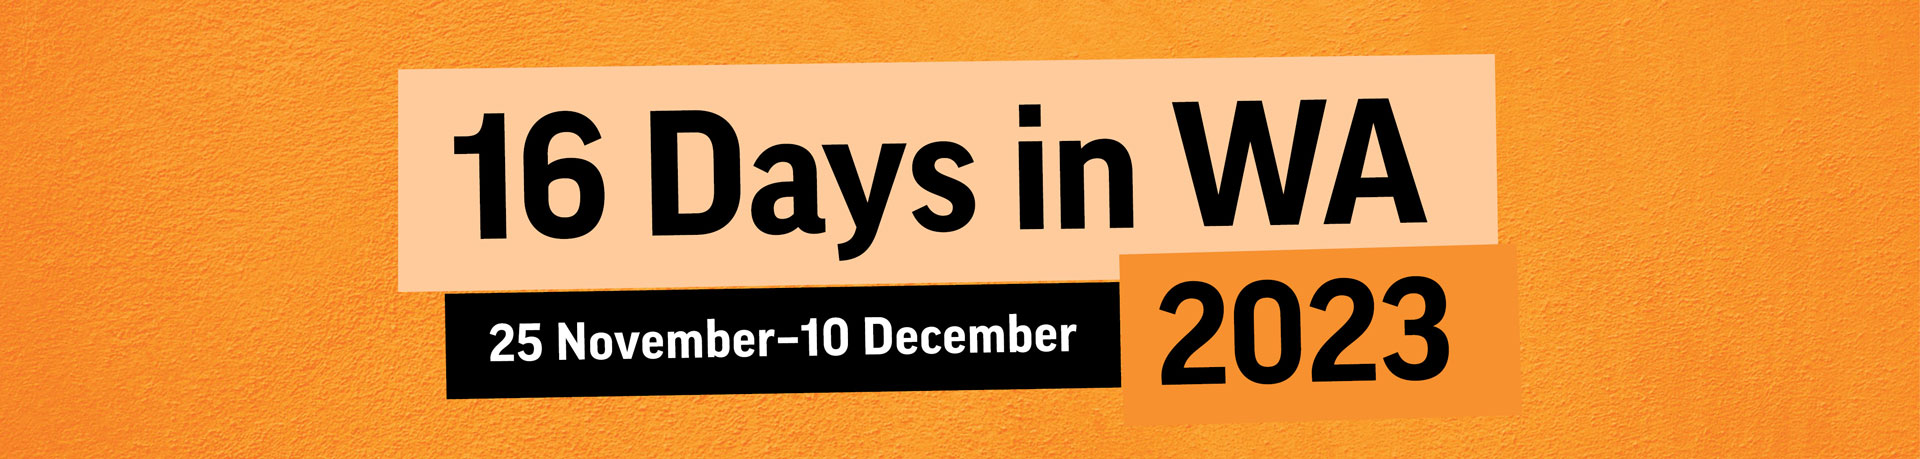 a banner with an orange background that reads 16 Days in WA 25 November - 10 December 2023